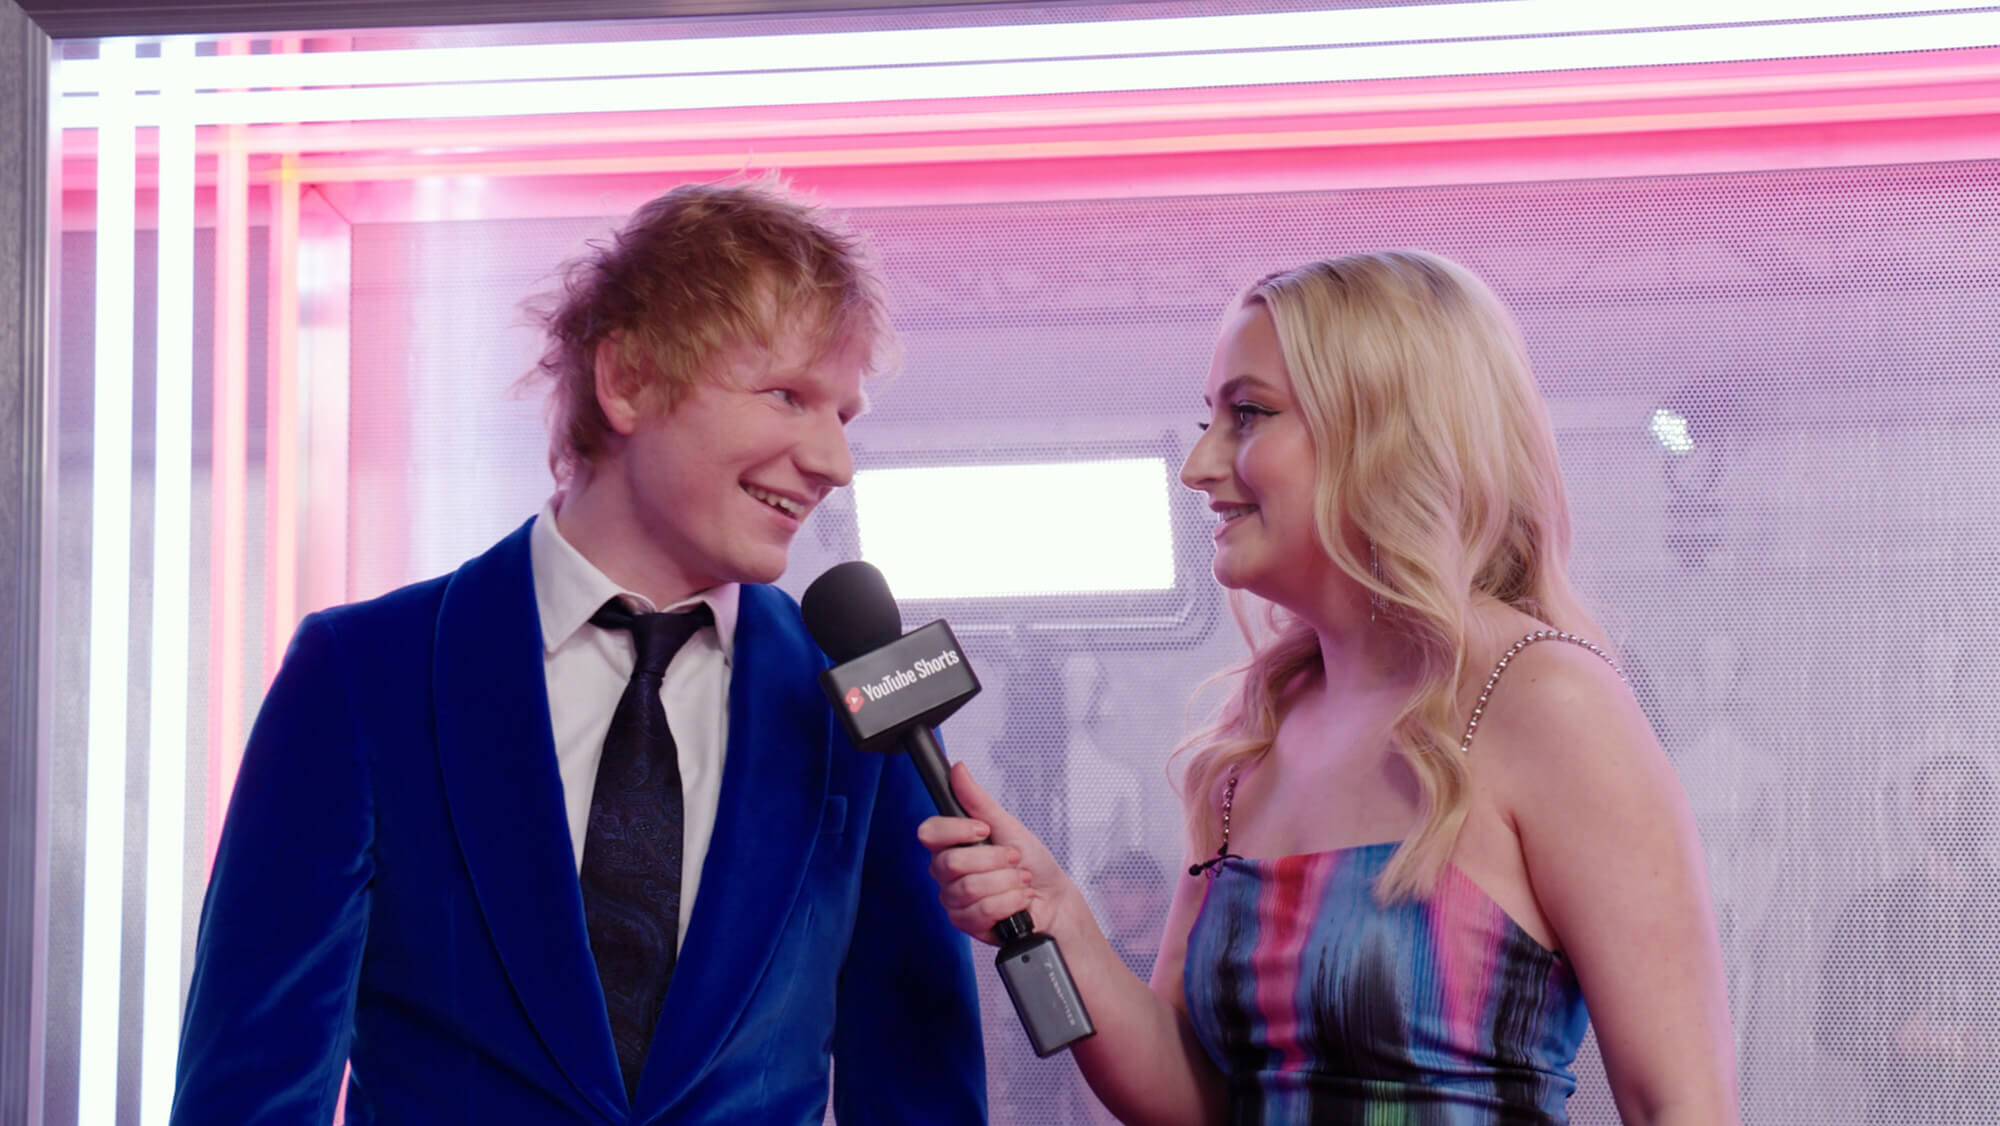 Presenter Amelia Dimoldenberg with a microphone interviews Ed Sheeran at The BRITS 2022, from the Rise Media case studies archive